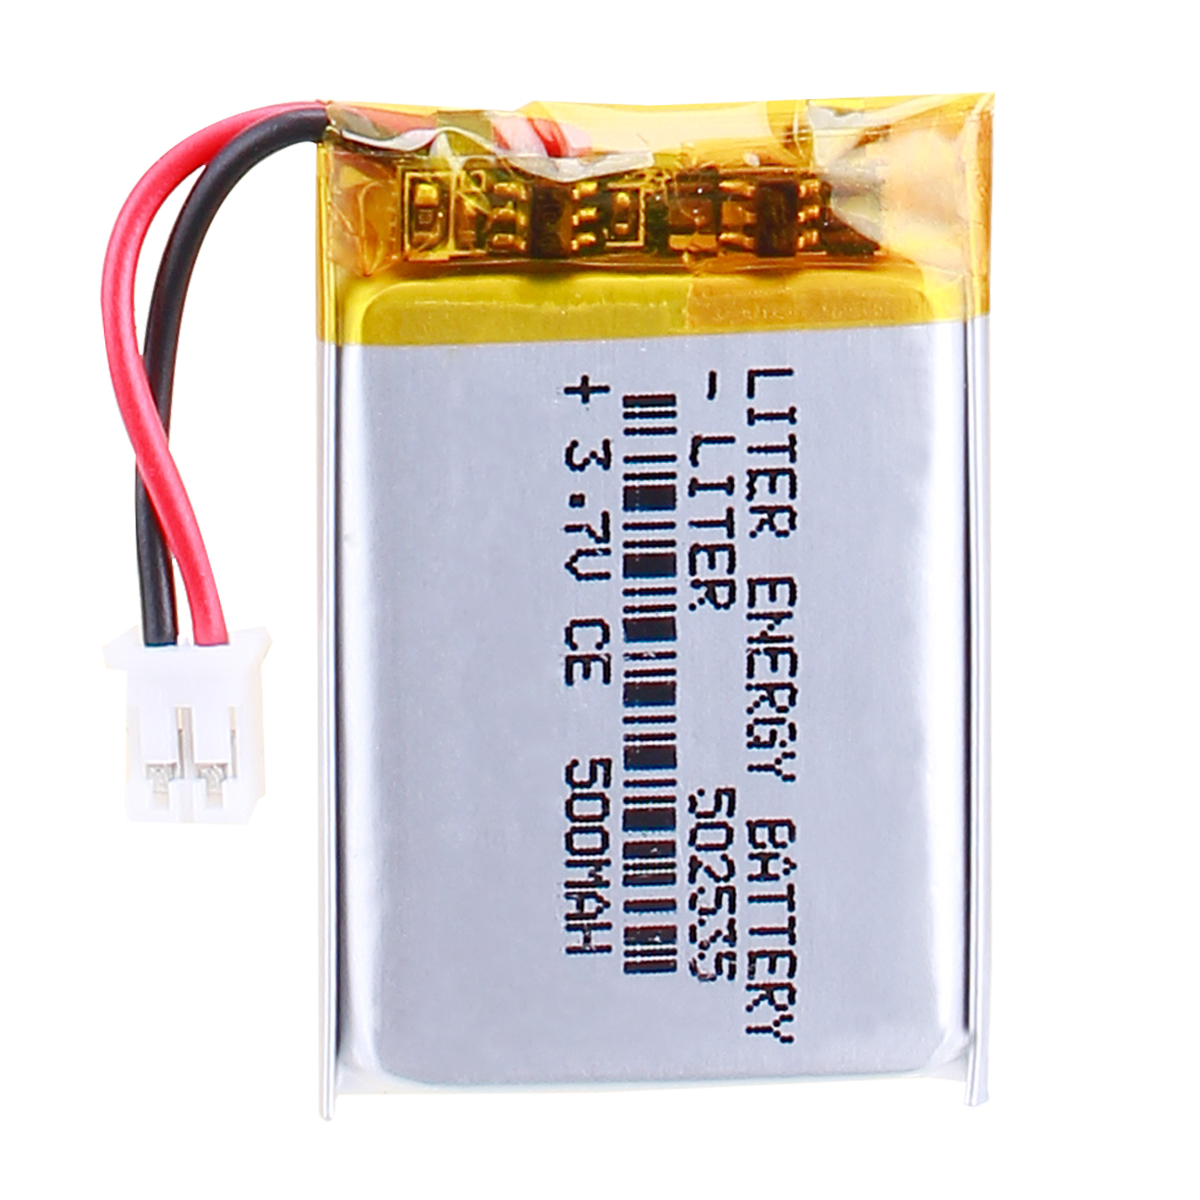 100pcs Lithium Polymer Battery liter 502535 3.7V 500mAh With PCM & Wires